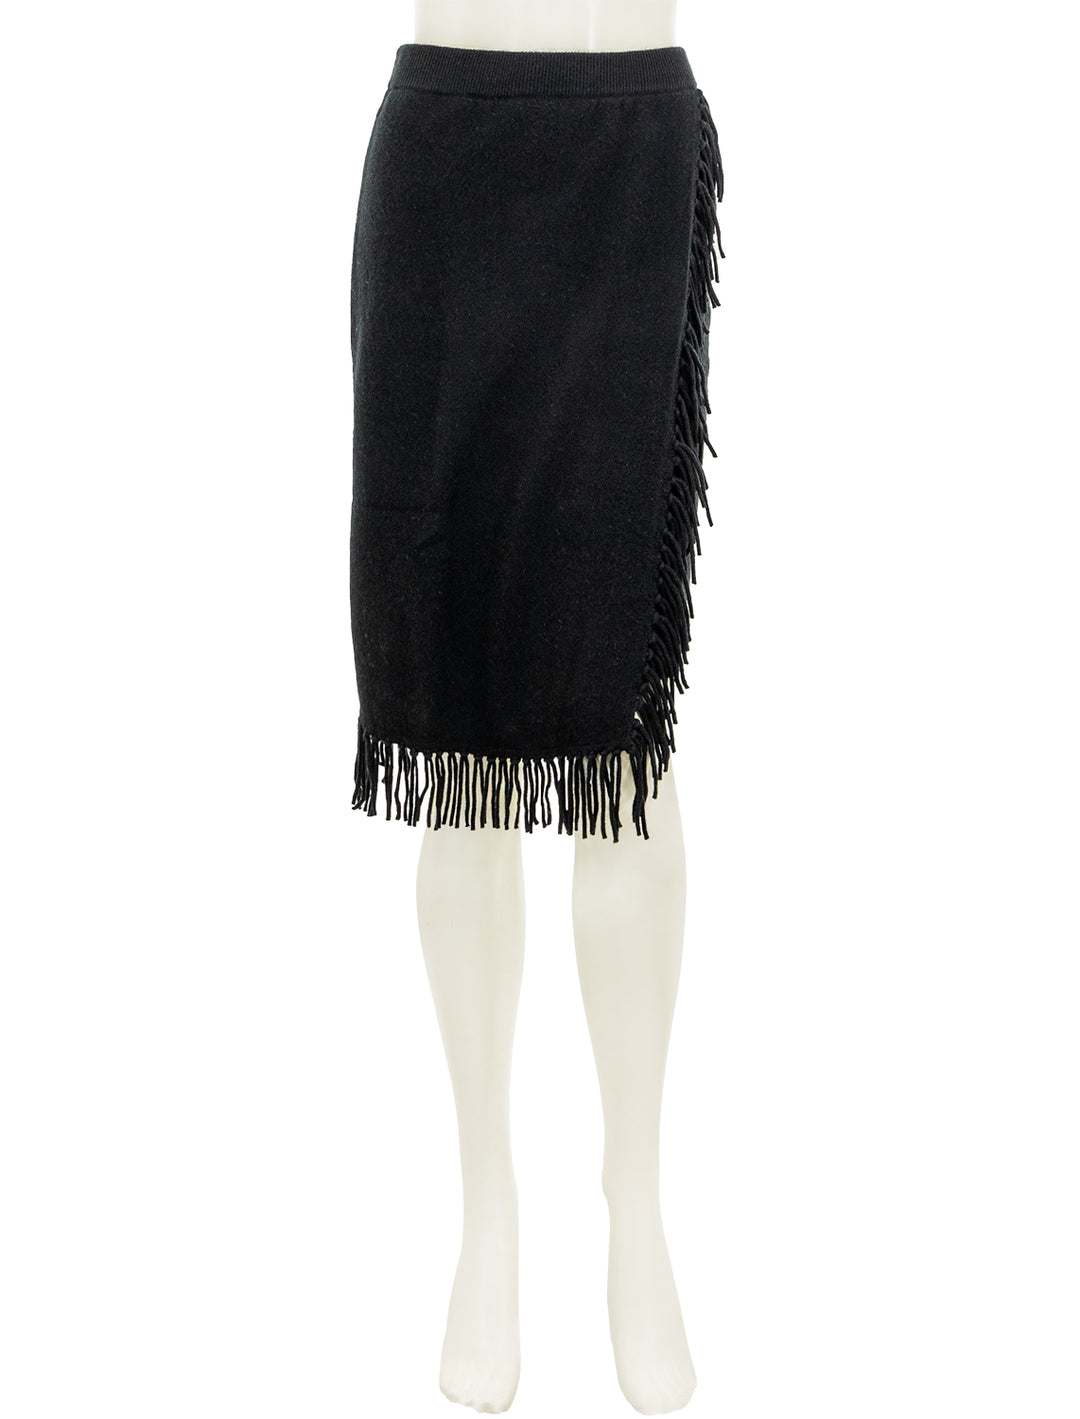 Front view of Minnie Rose's wrap skirt with fringe in black.